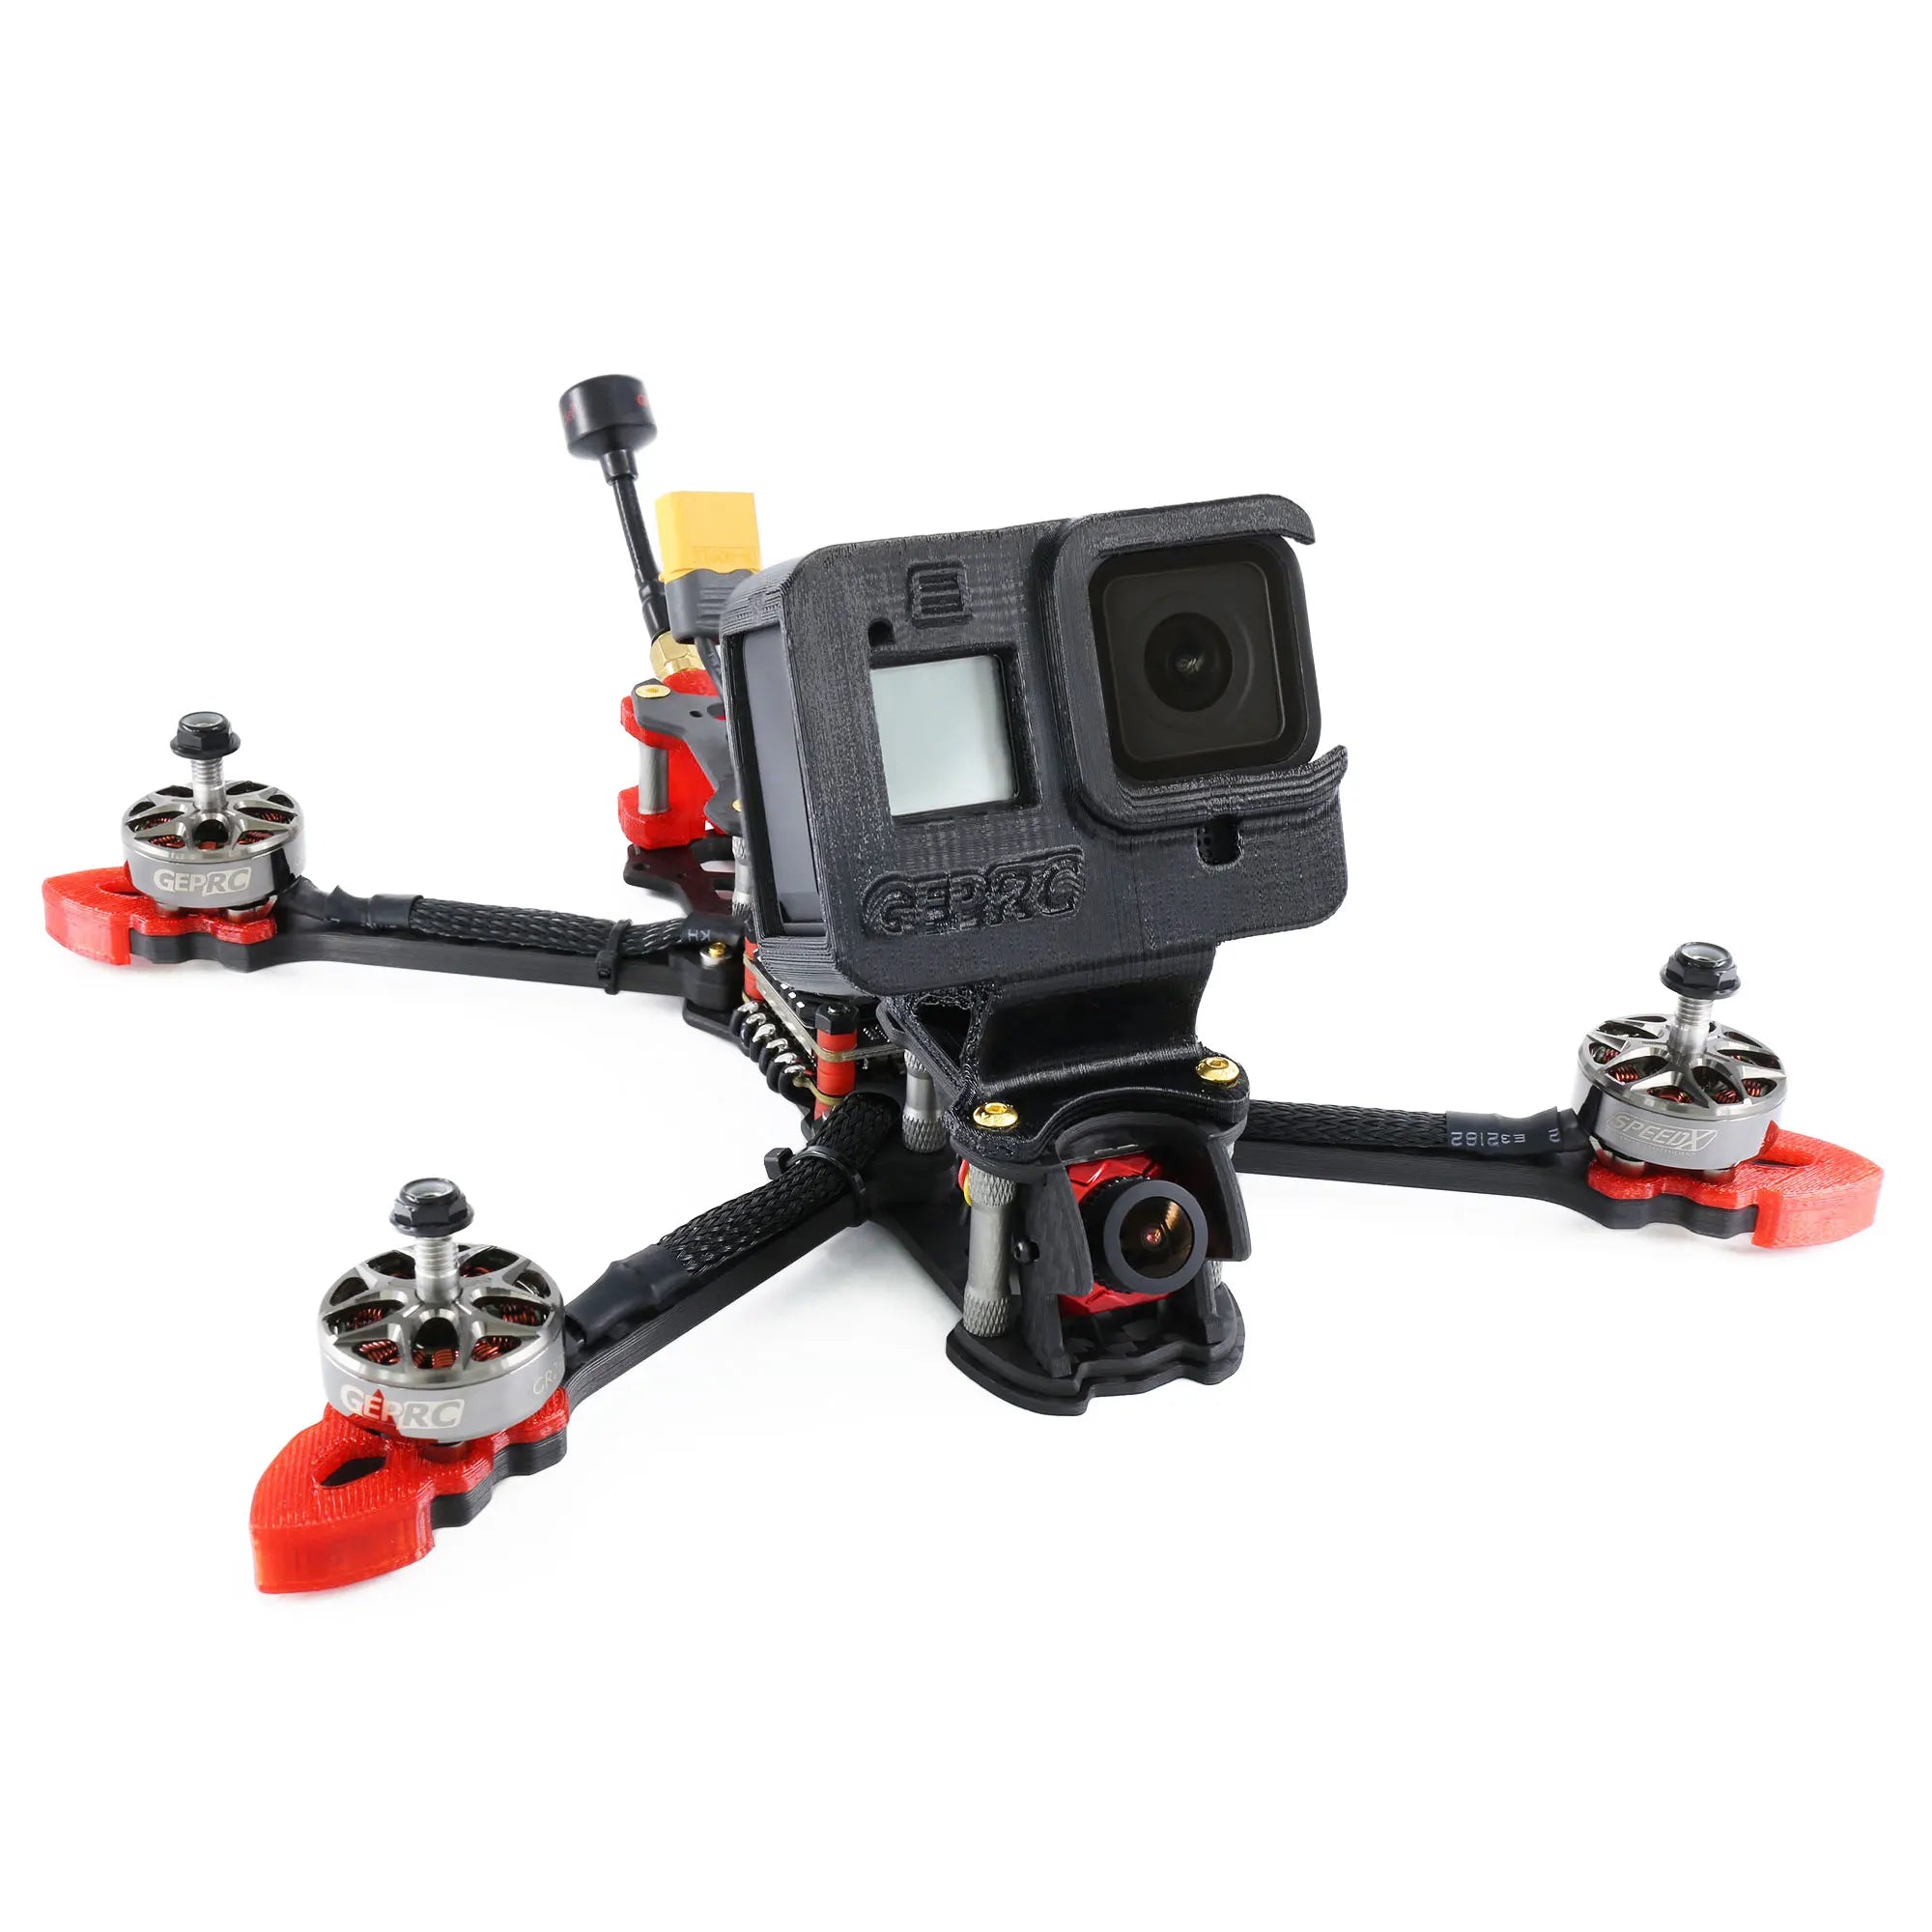 GEPRC MARK4 FPV Drone, the BNF version comes with a compatible receiver . it can fly as long as press